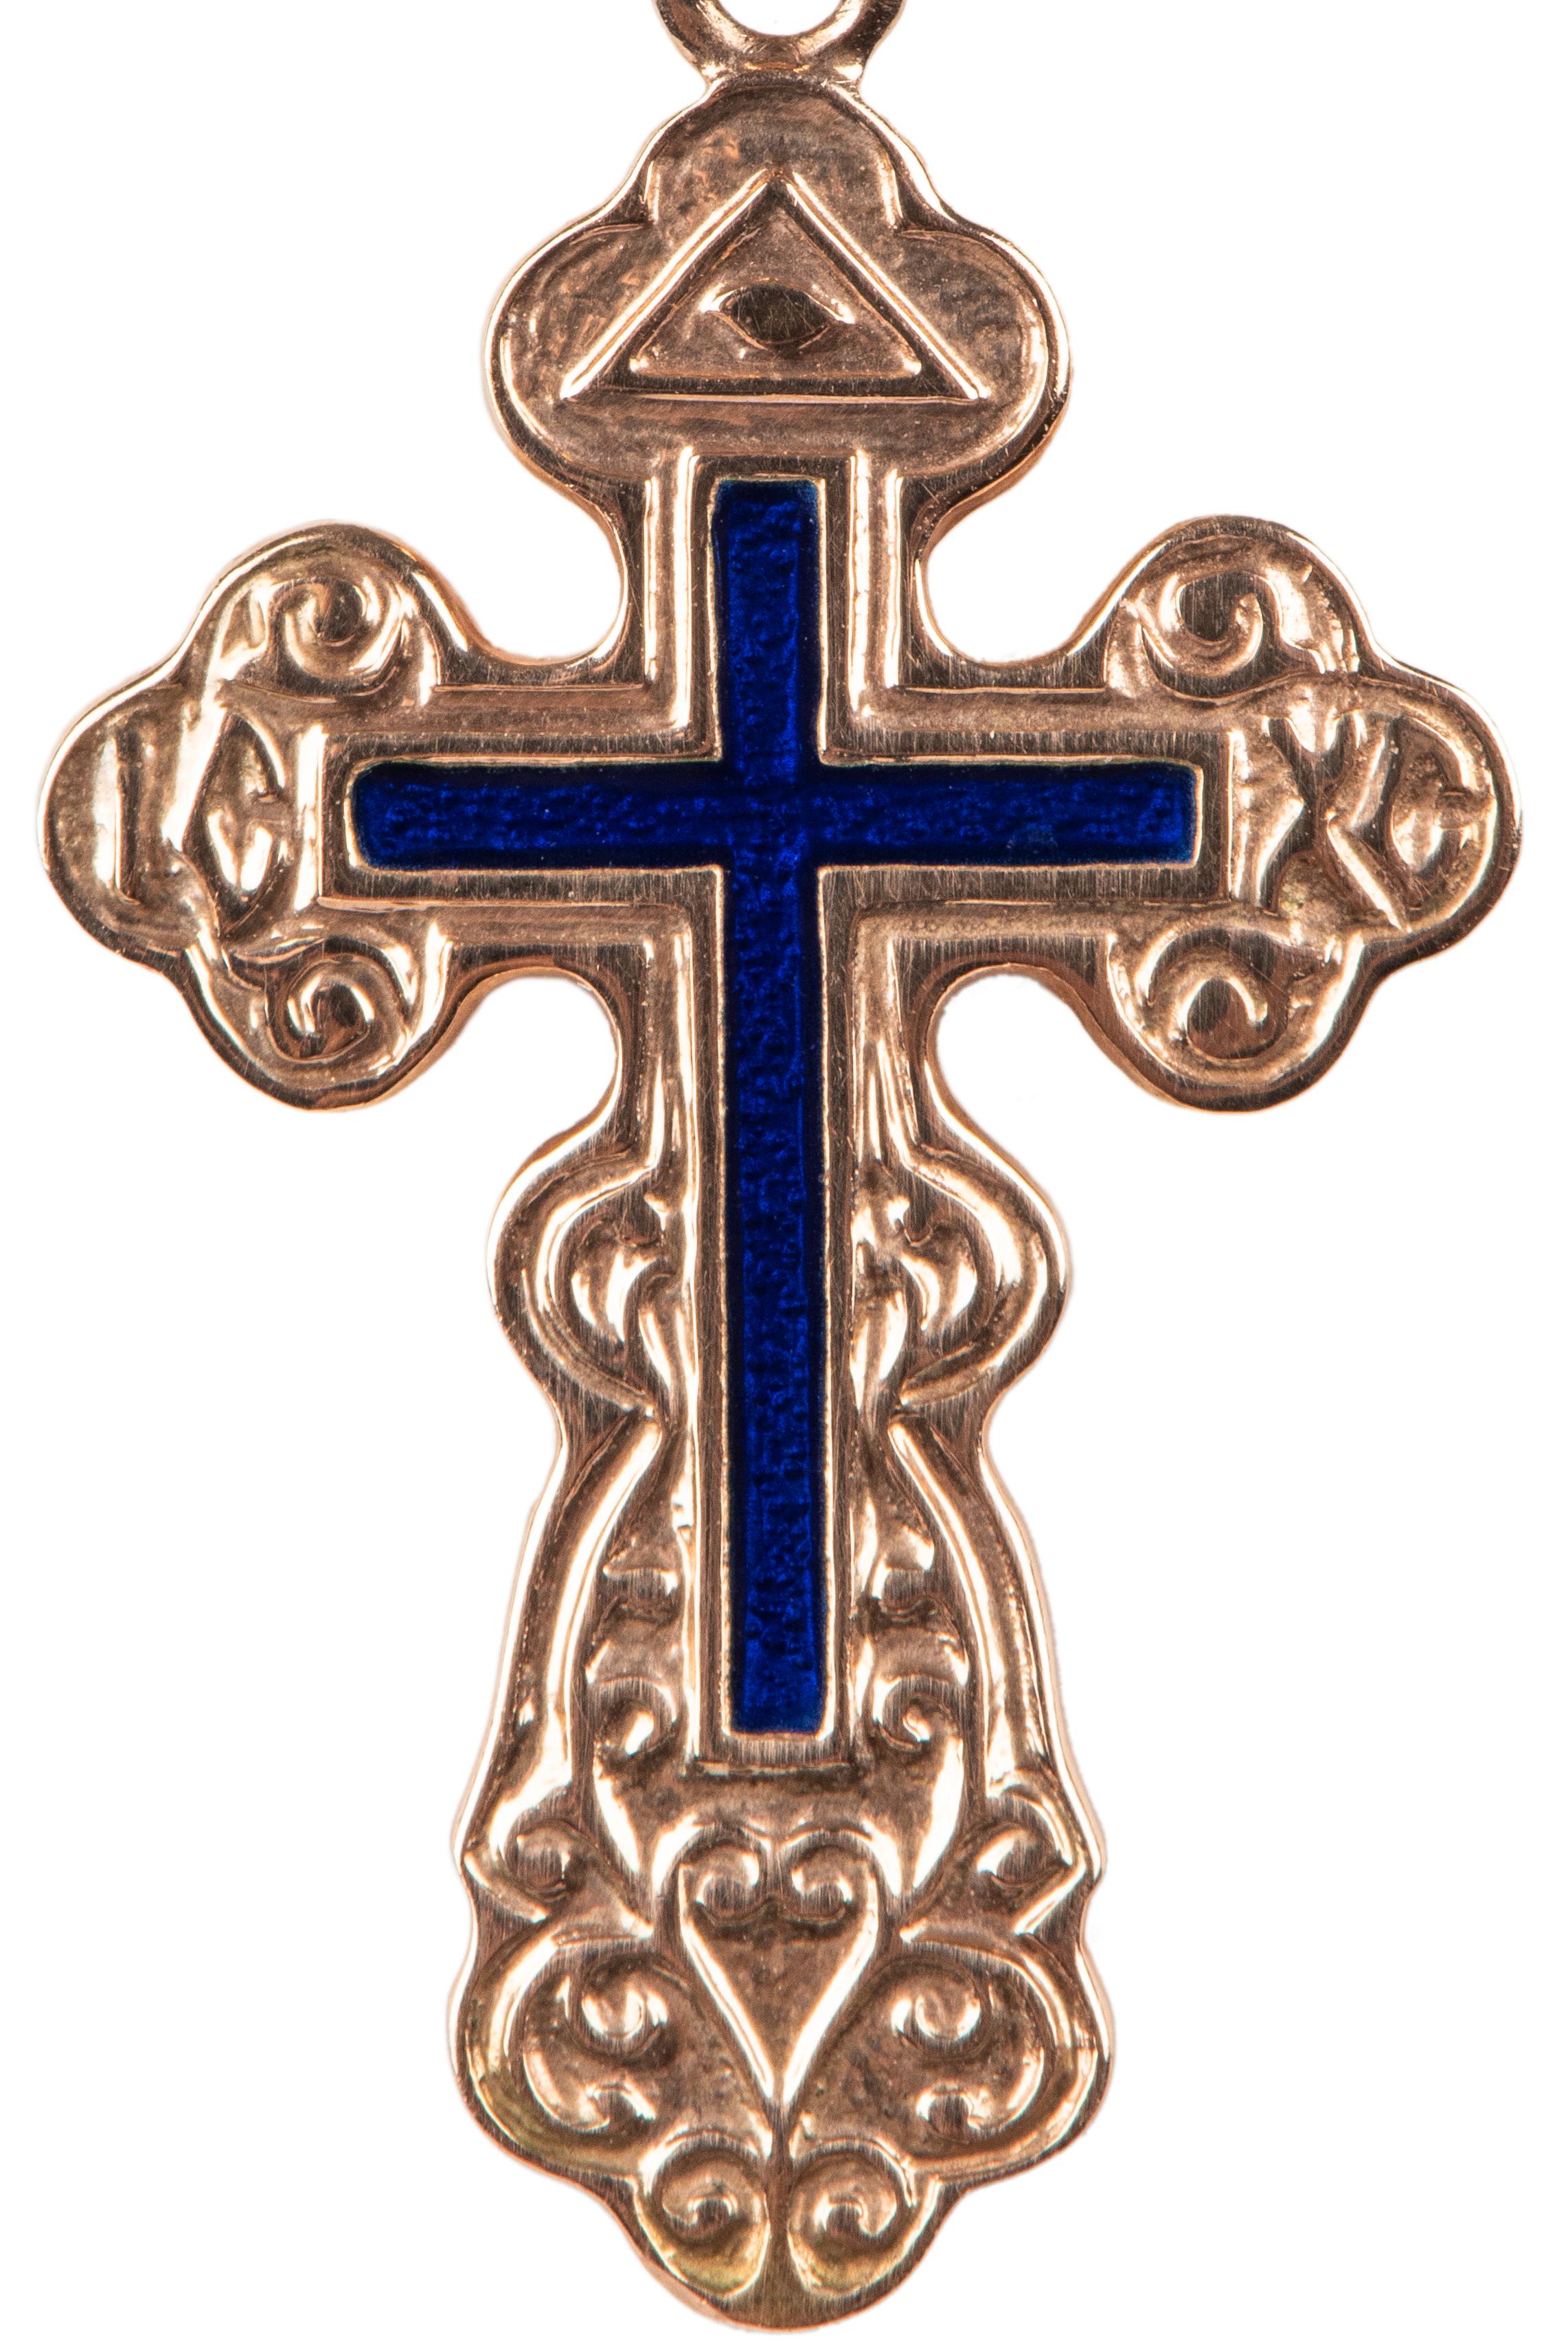 A small Russian rose gold Orthodox cross, the front enamelled in deep blue enhanced with scrolls recalling pre-revolutionary Russian designs. Made in St. Petersburg, Russia.

St. Petersburg, 1990s.

1 5/16 in. (3.3 cm.) including suspension ring.